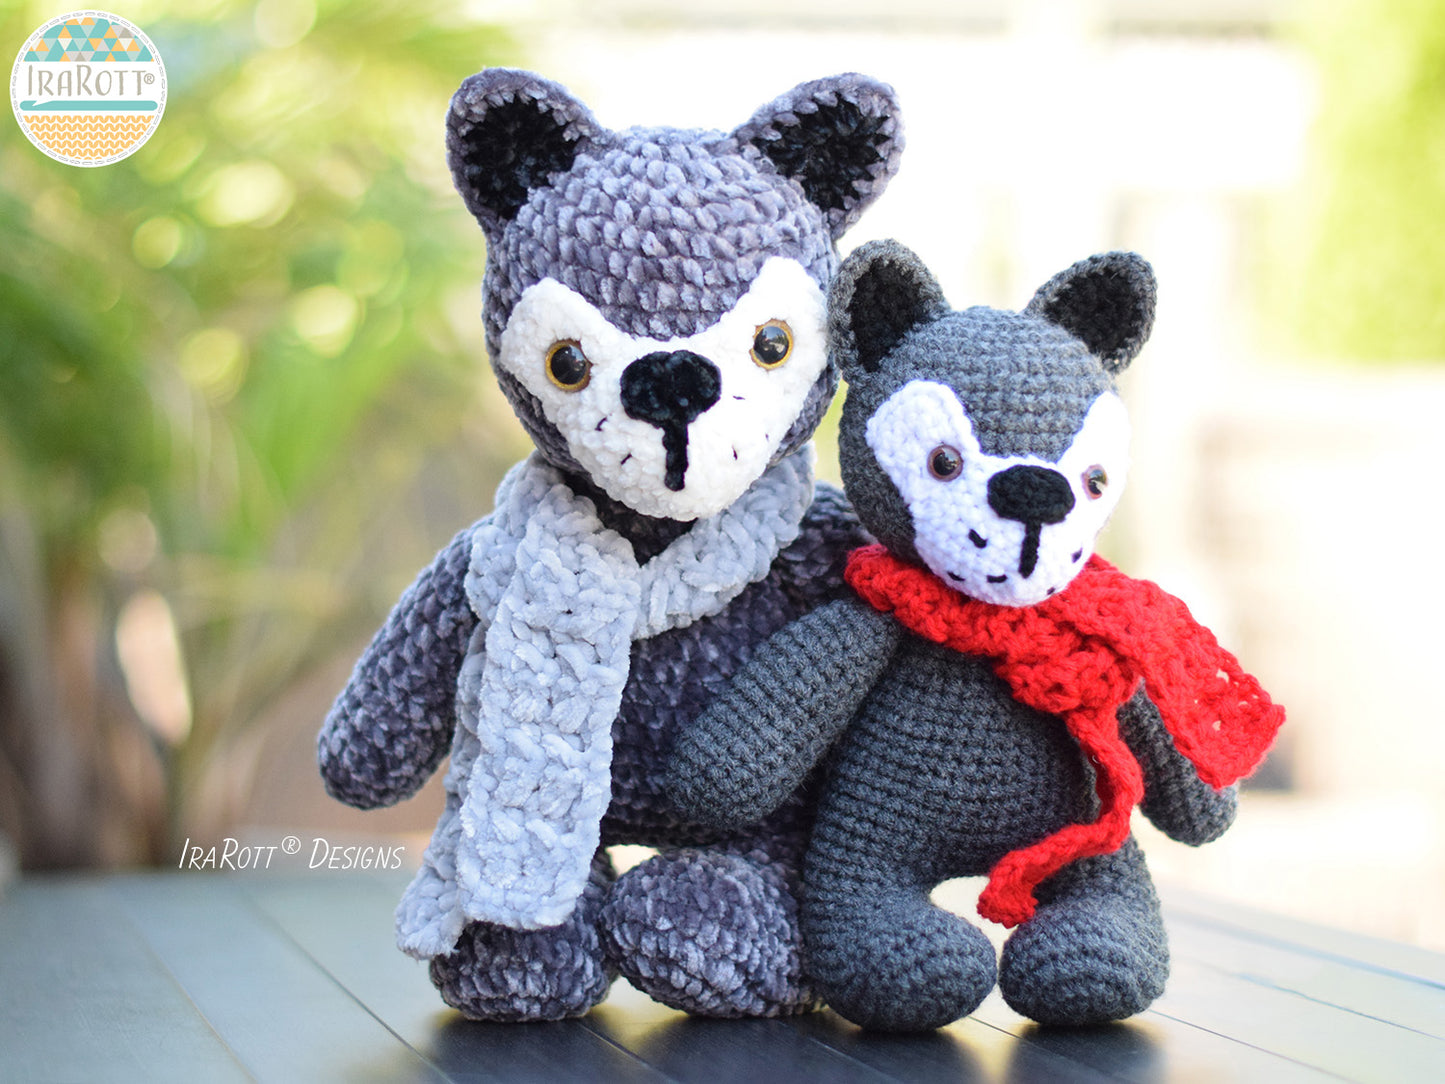 Raff and Rolf The Chubby Little Wolves Amigurumi Crochet Pattern